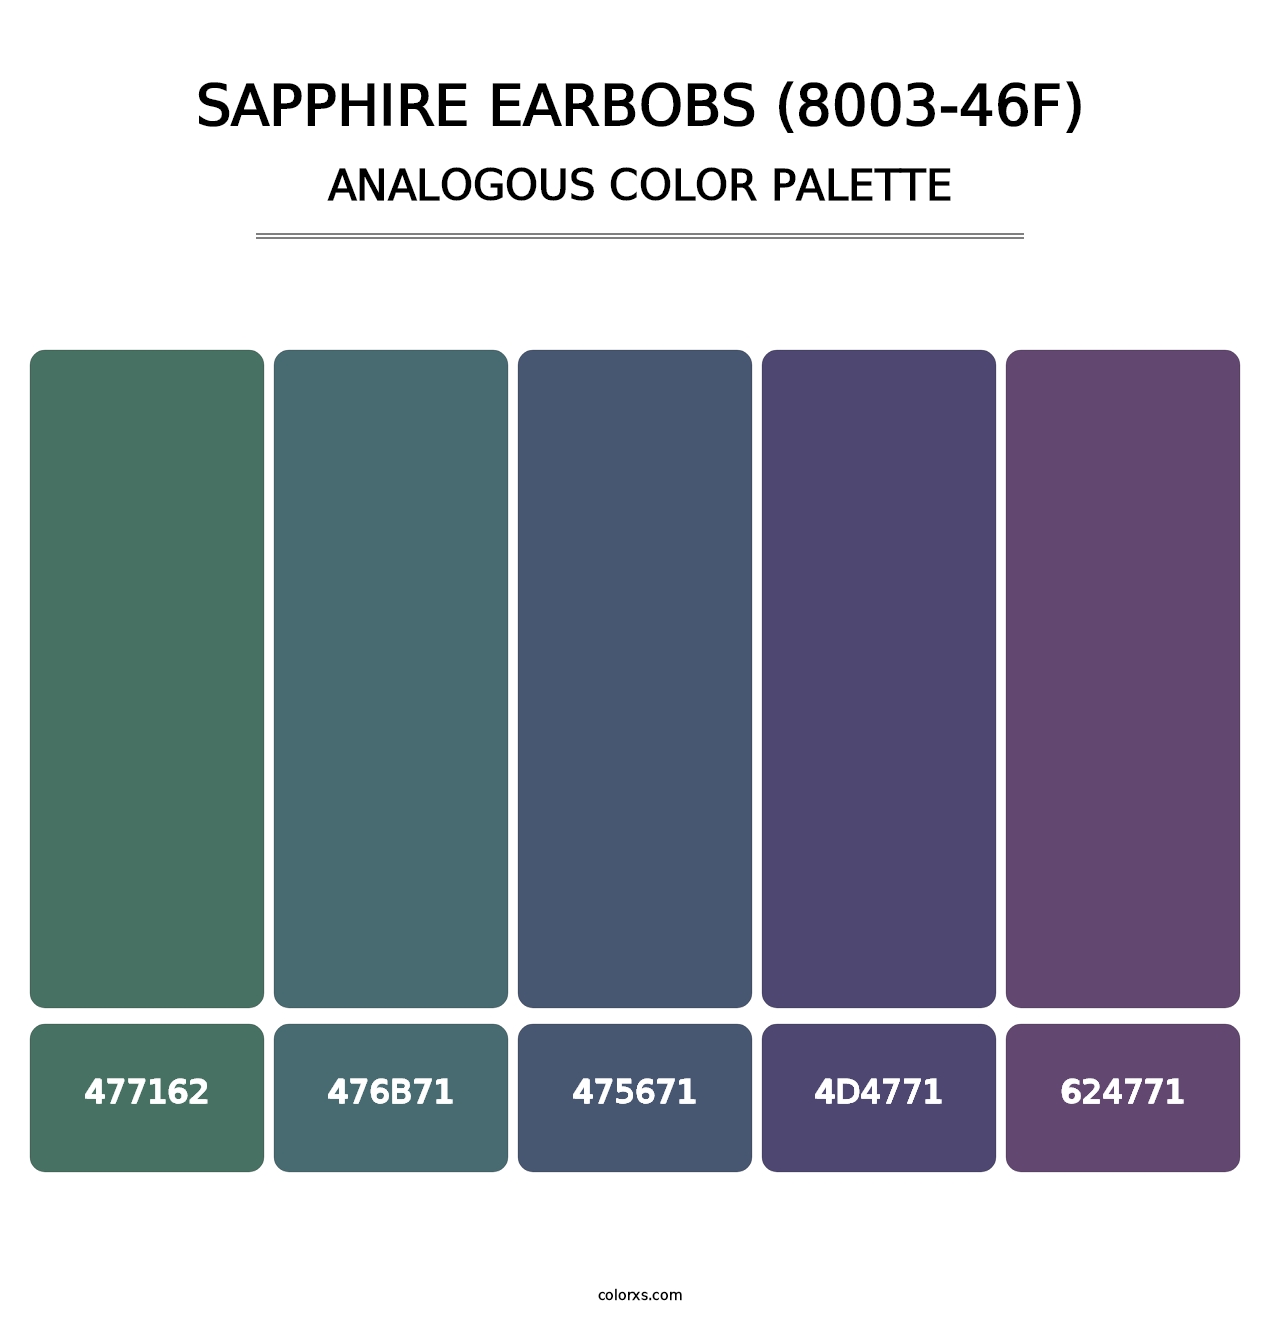 Sapphire Earbobs (8003-46F) - Analogous Color Palette